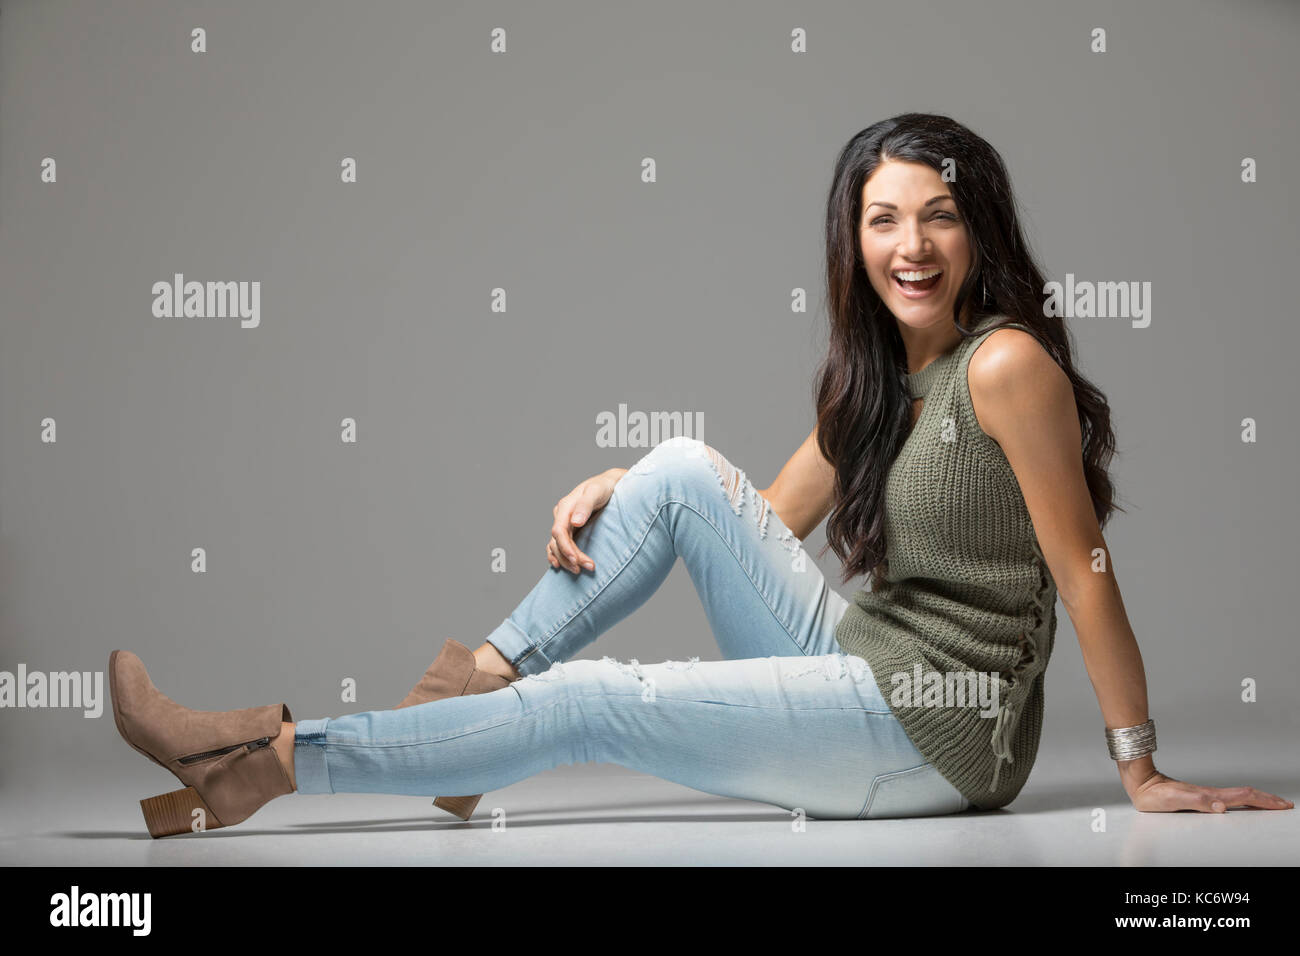 Studio shot of woman sitting on floor and laughing Stock Photo